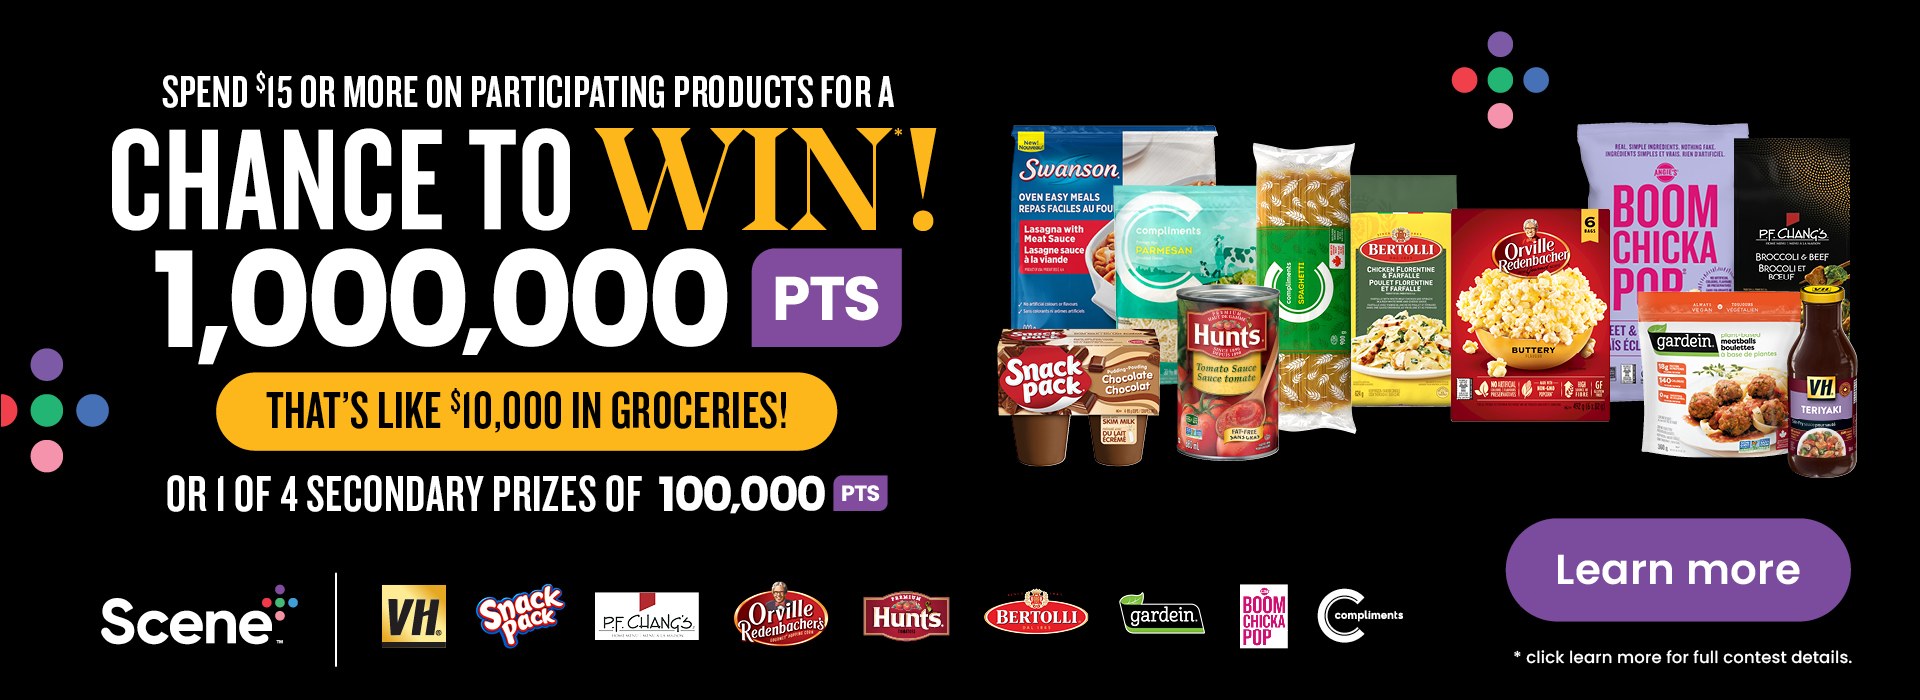 The following image contains the text, "Spend $15 or more on participating products for a chance to win 1,000,000 Scene+ Points. Along with the learn more button with a various brand logos and scene plus logos."